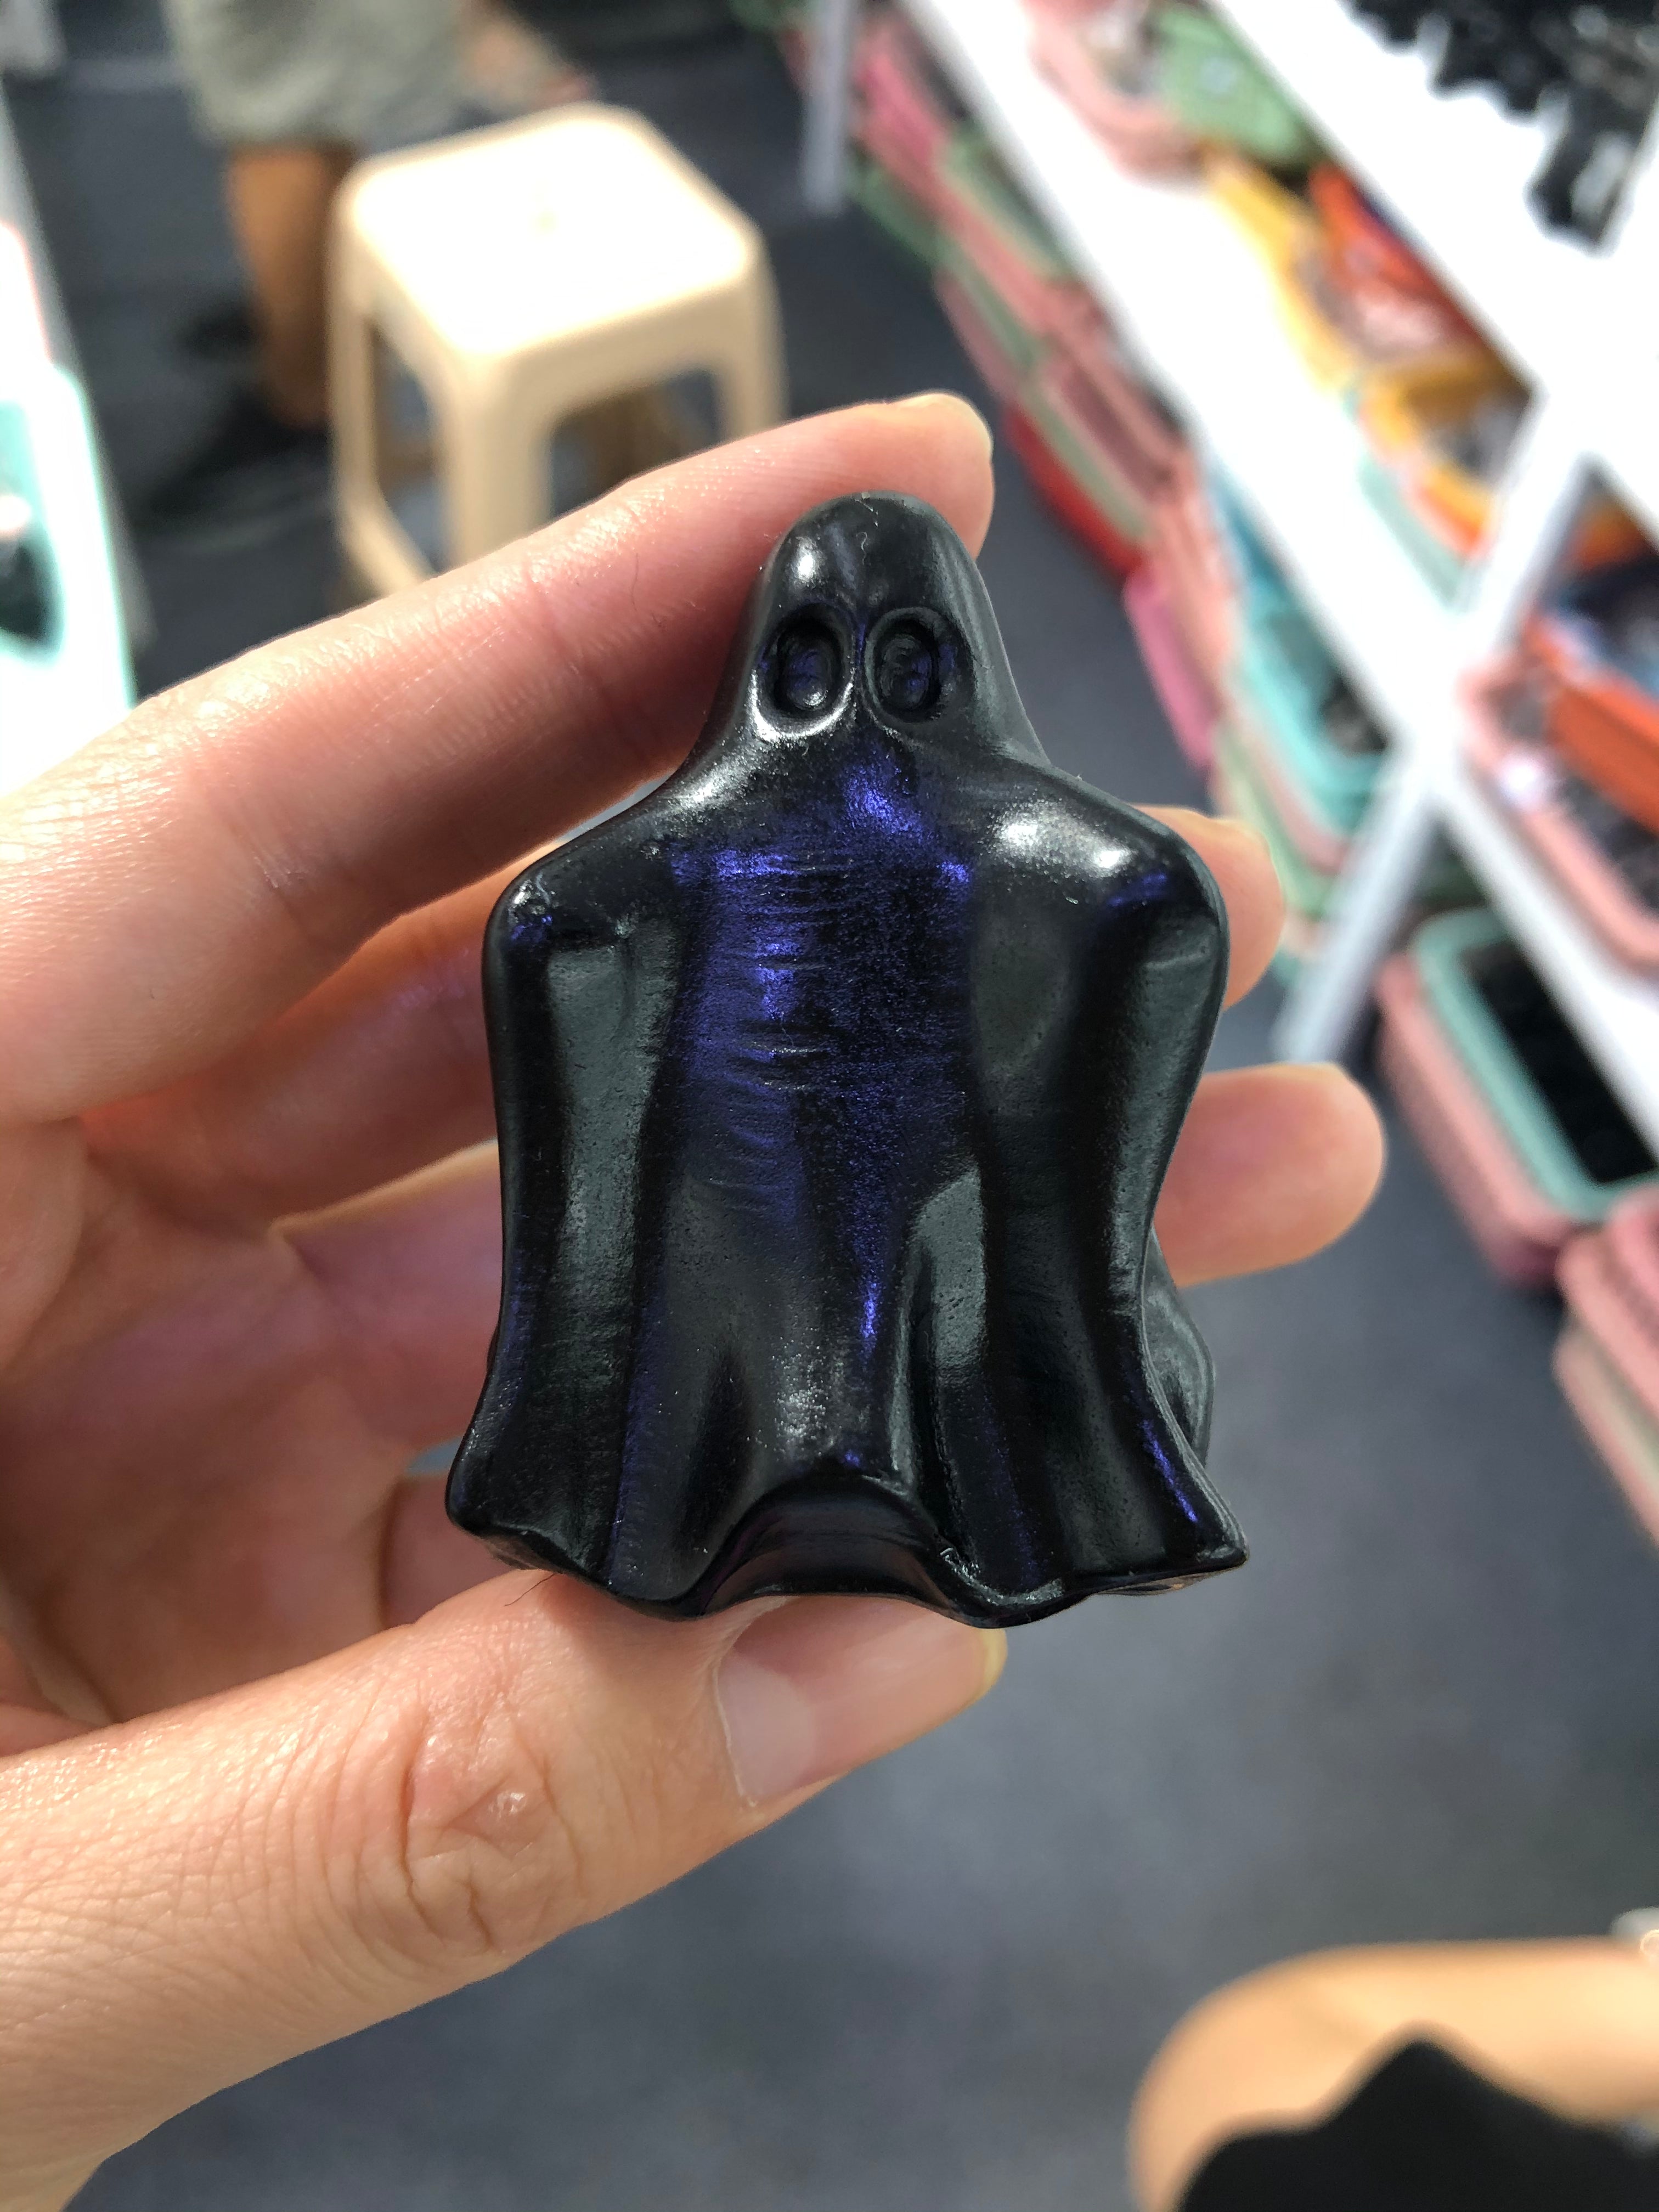 Obsidian animals/ghost/penis/